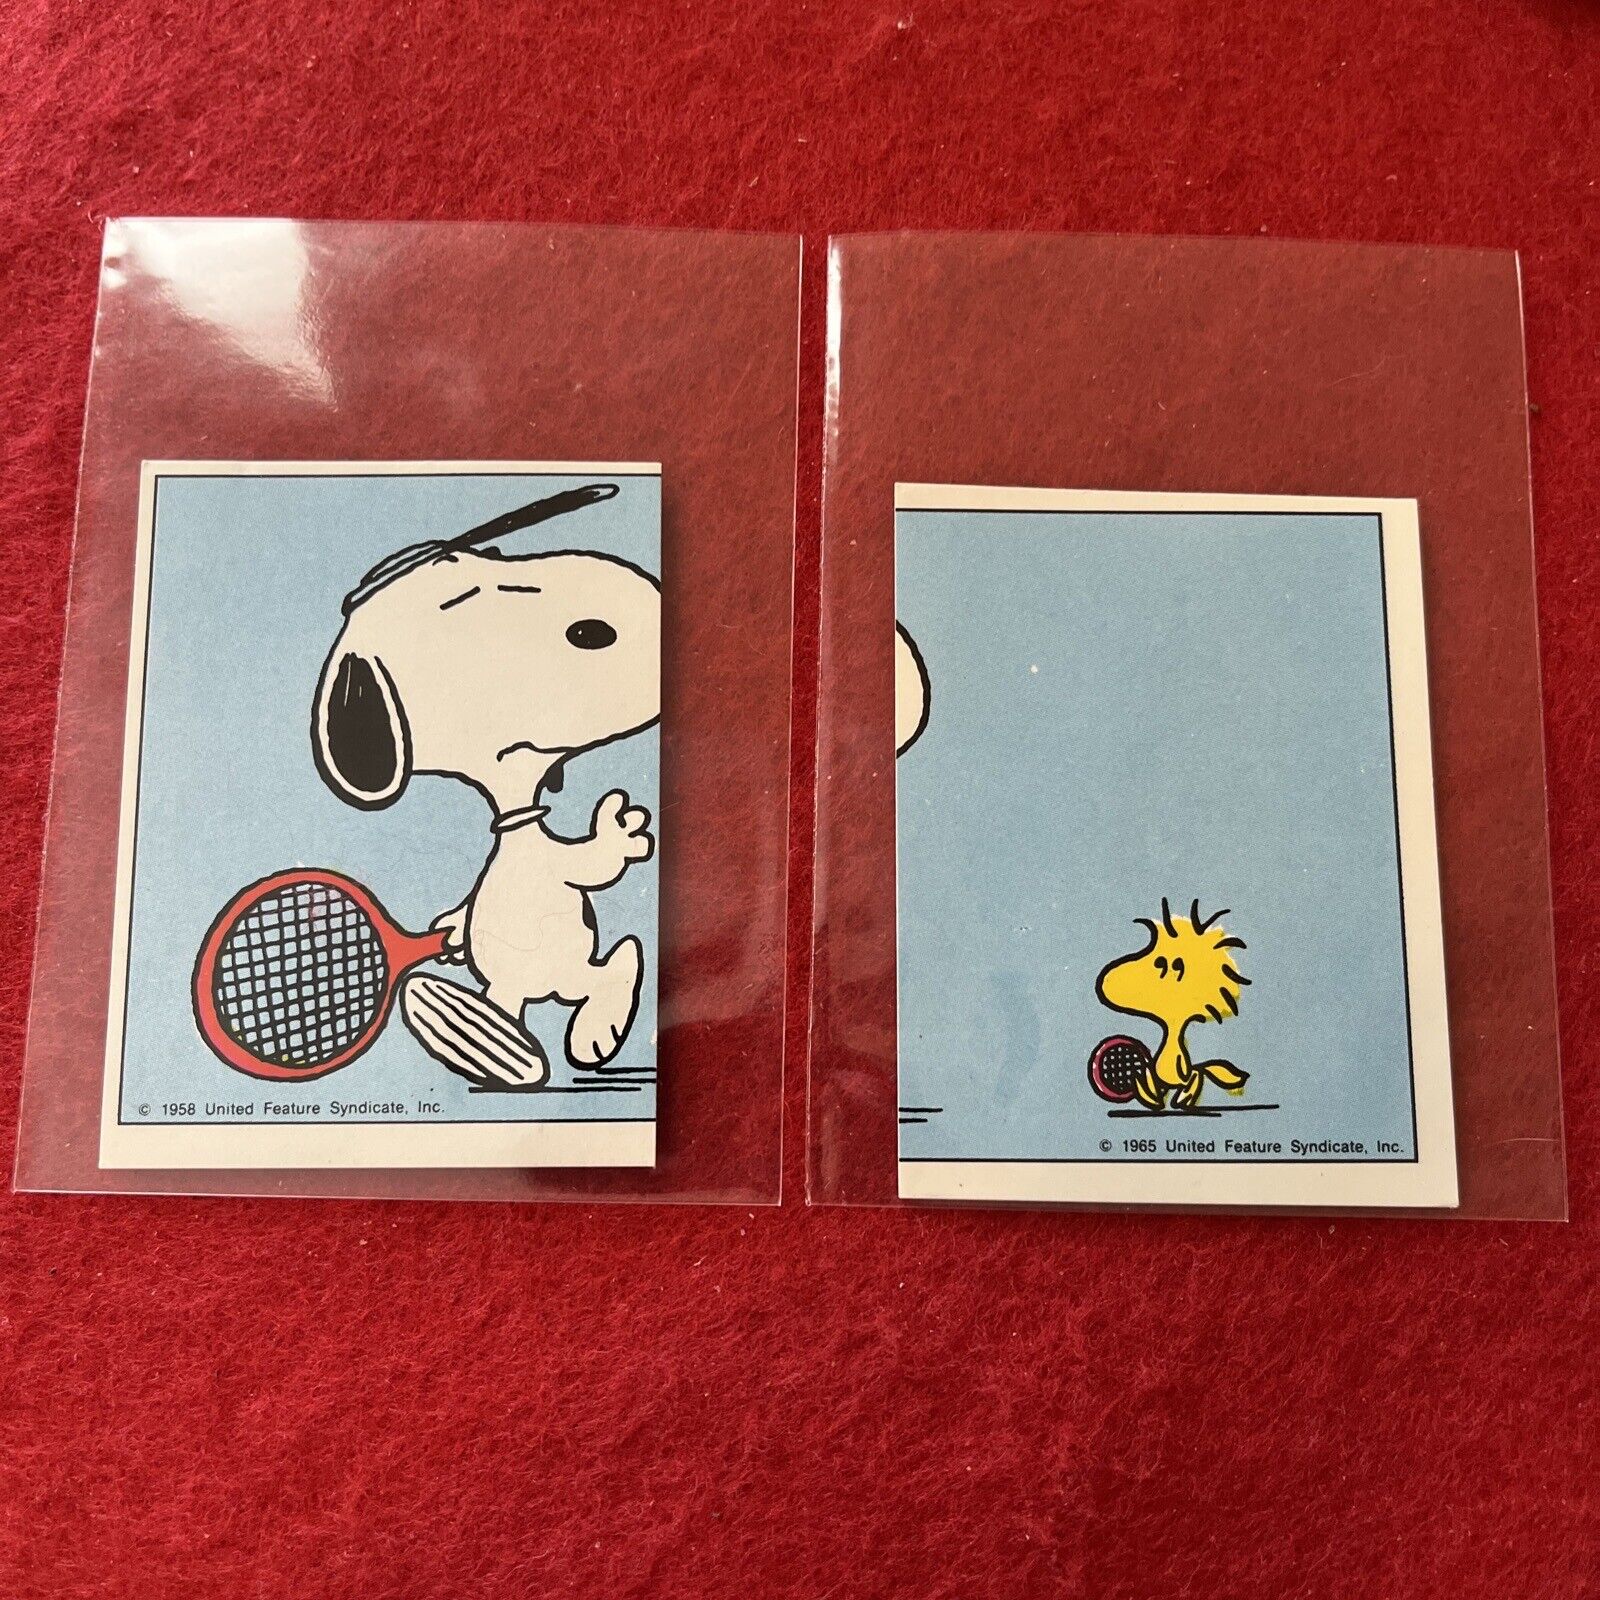 1987 Panini “I LOVE SNOOPY” Snoopy / Woodstock Card Lot (2) Cards Form Image